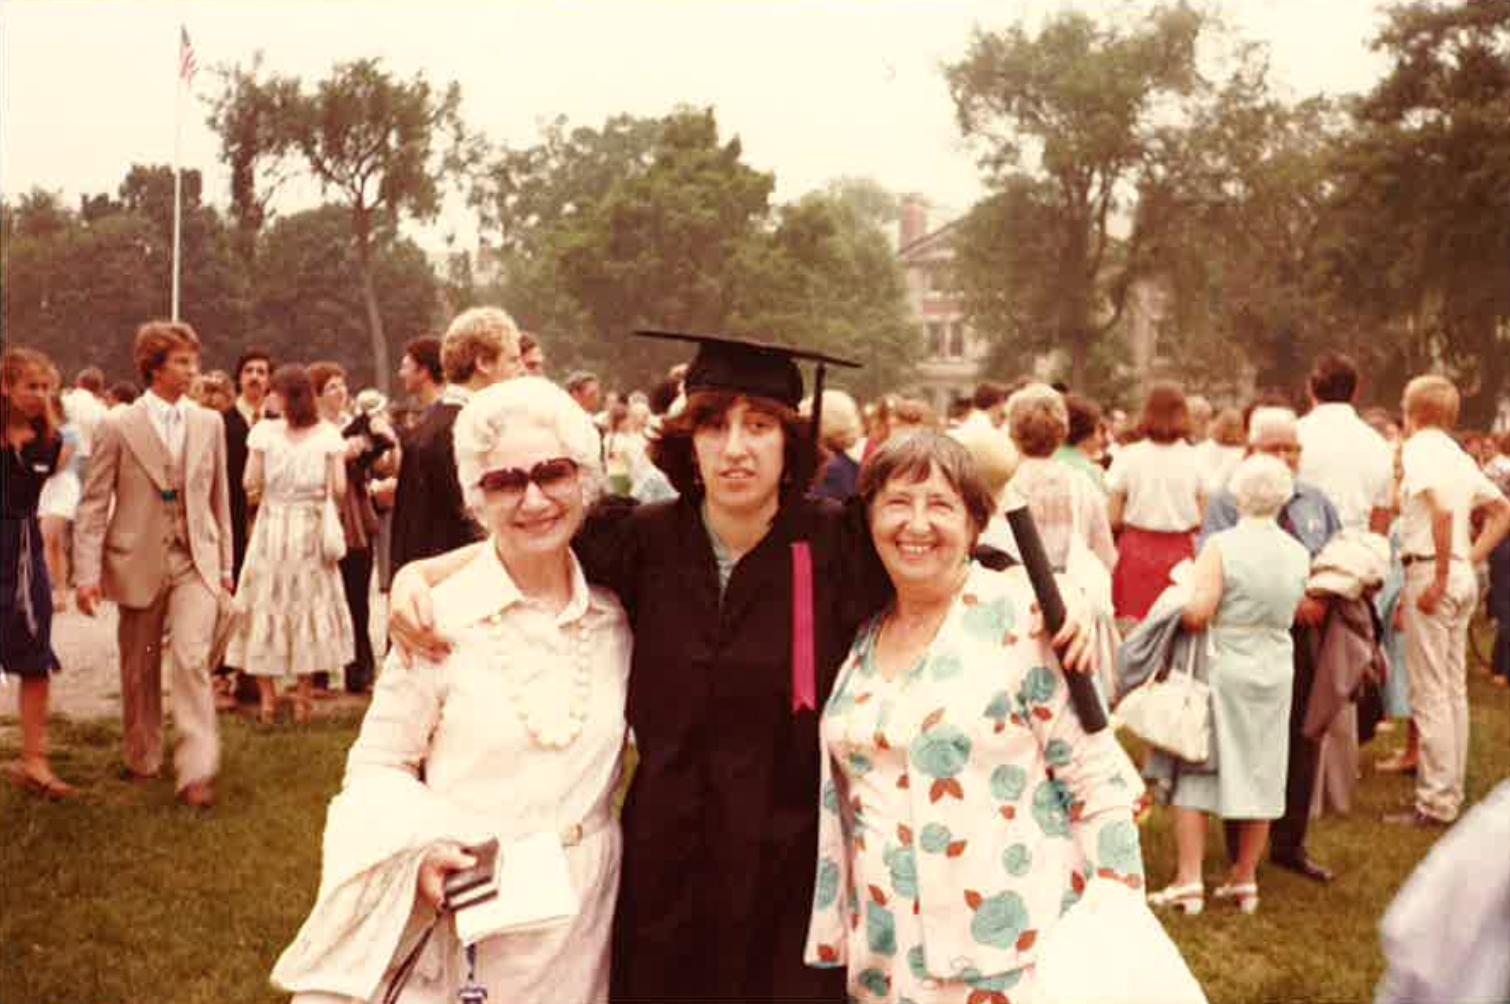 Old photograph of Dartmouth graduate at commencement with two grandmothers